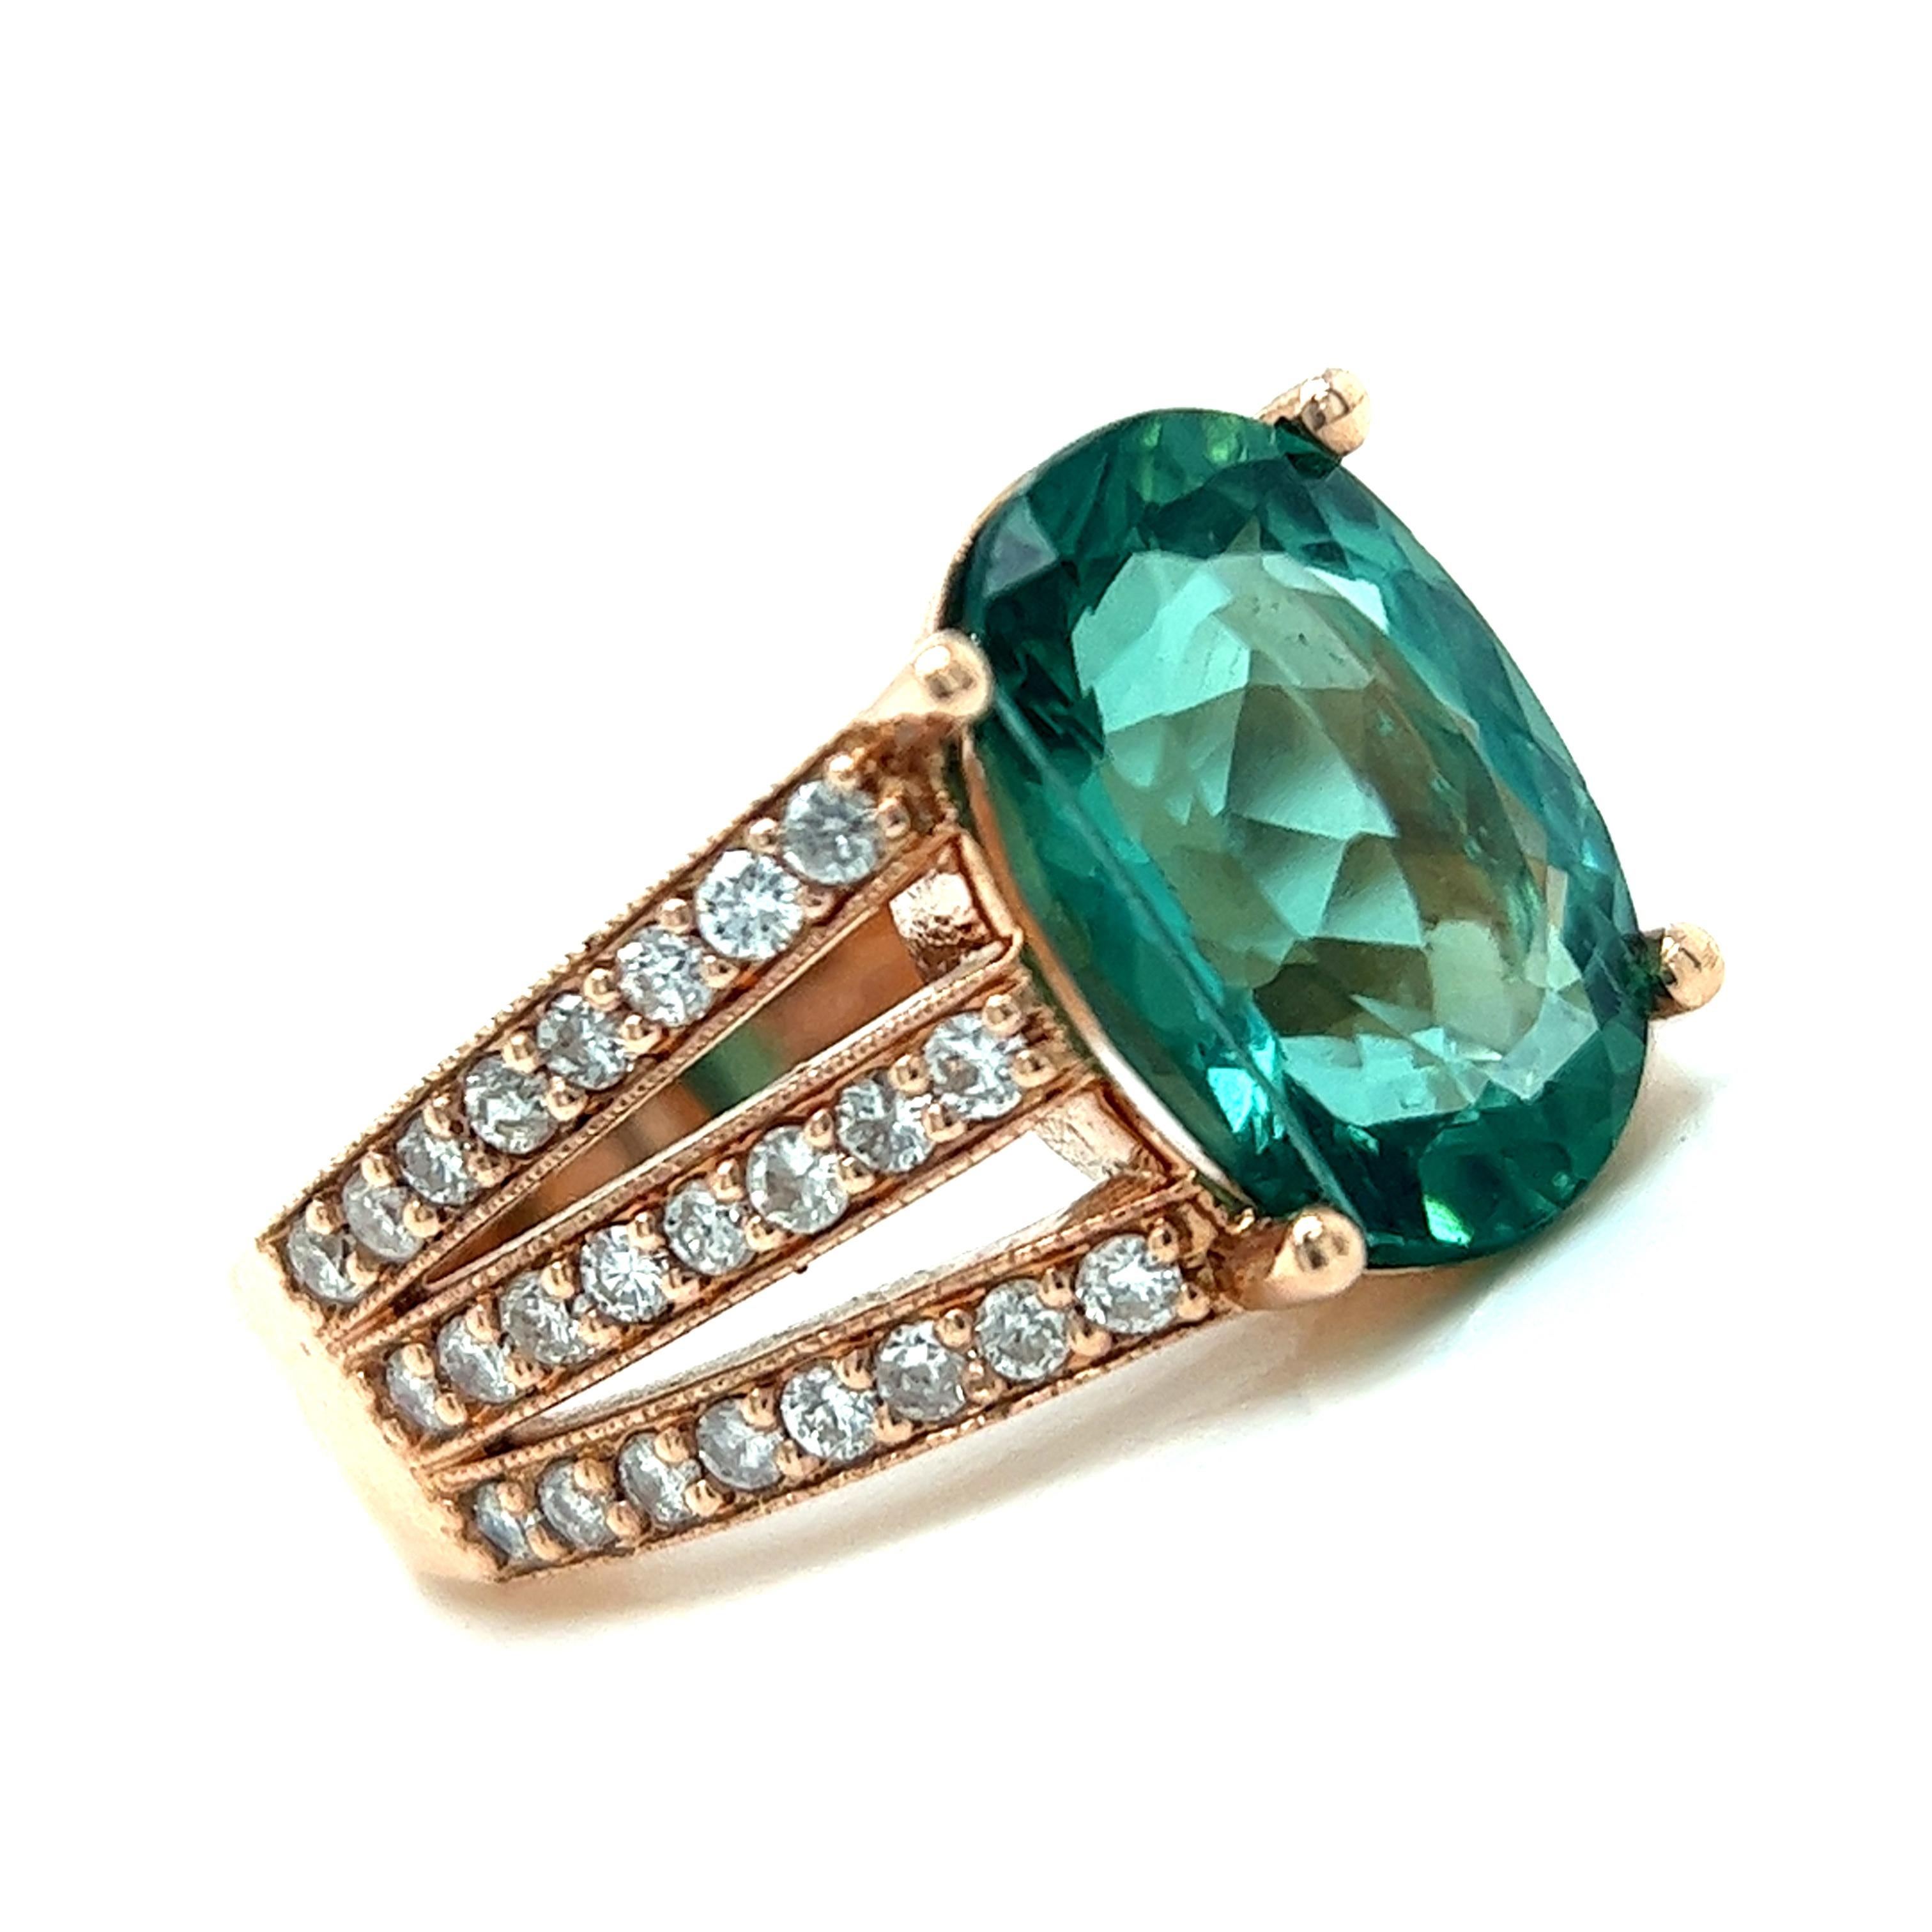 Oval Cut Ring 14kt Gold Oval Green Tourmaline 4.52 cts. & Diamonds 0.63 cts. Split Shank For Sale